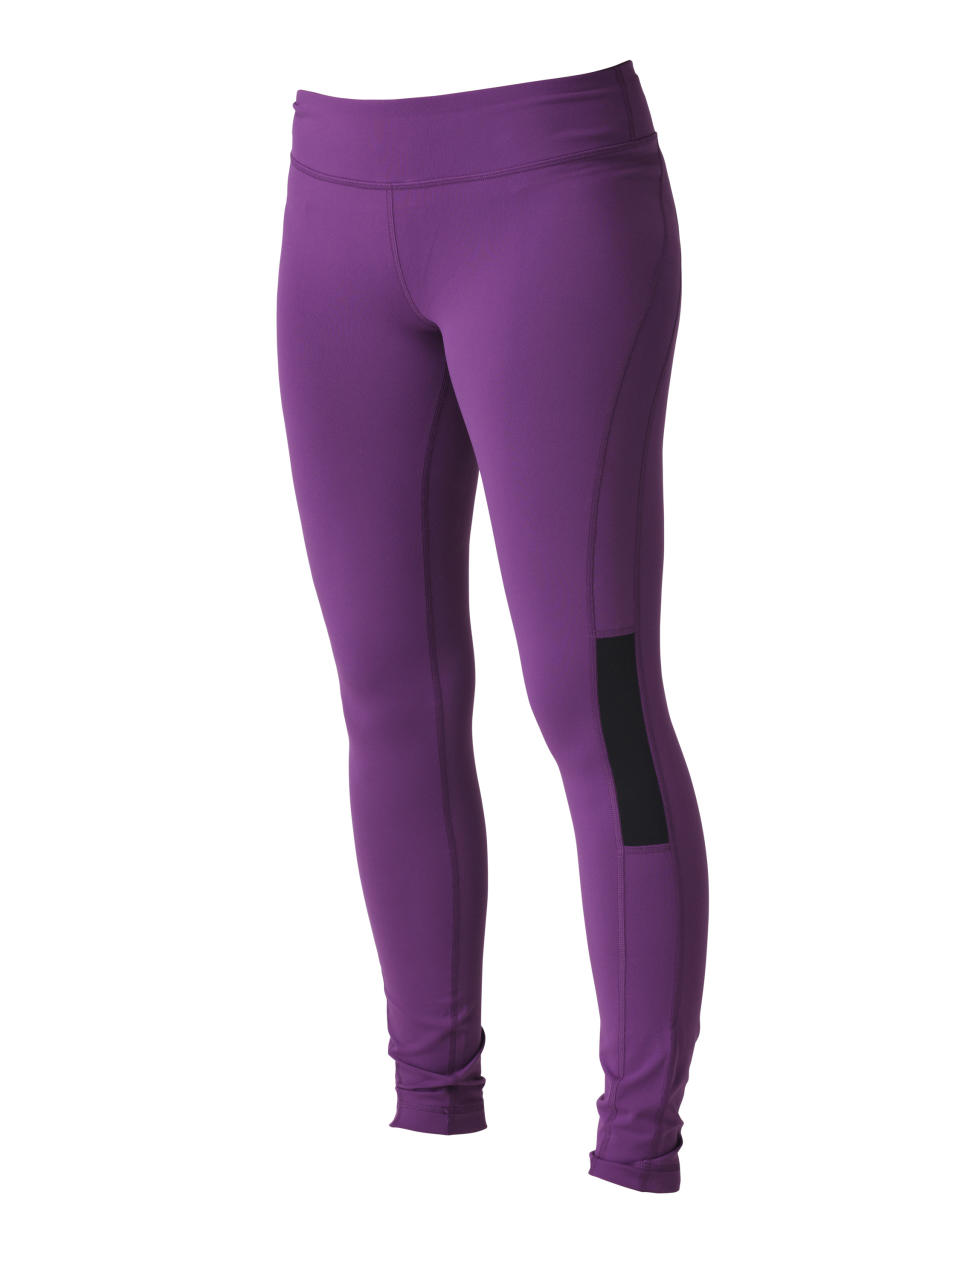 This product image released by Roxy Outdoor Fitness shows a women's standard tight with a contoured yoga-style waistband and flatlock seams in egg plant. Participation in mud runs and obstacle courses, such as the Warrior Dash or Tough Mudder, is growing by leaps and bounds. The right clothes and gear could be the difference in performance and comfort. (AP Photo/Roxy Outdoor Fitness)